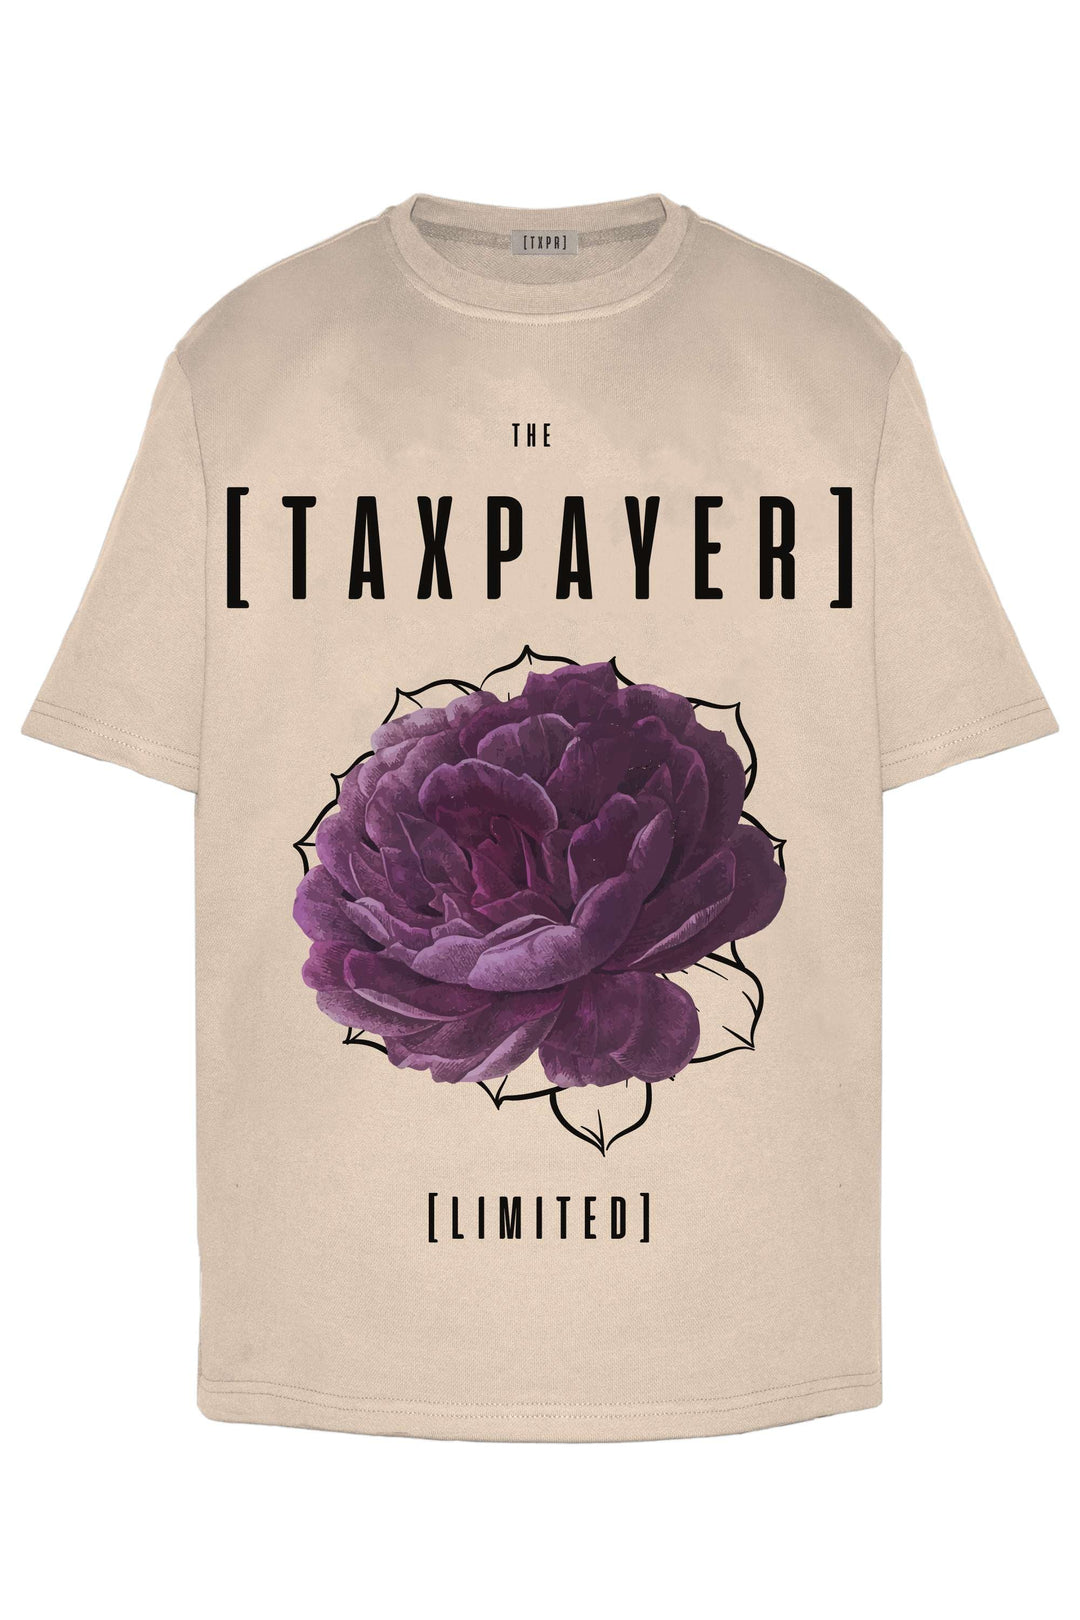 [ TAXPAYER ] DESERTED FLOWER - T - TAXPAYER